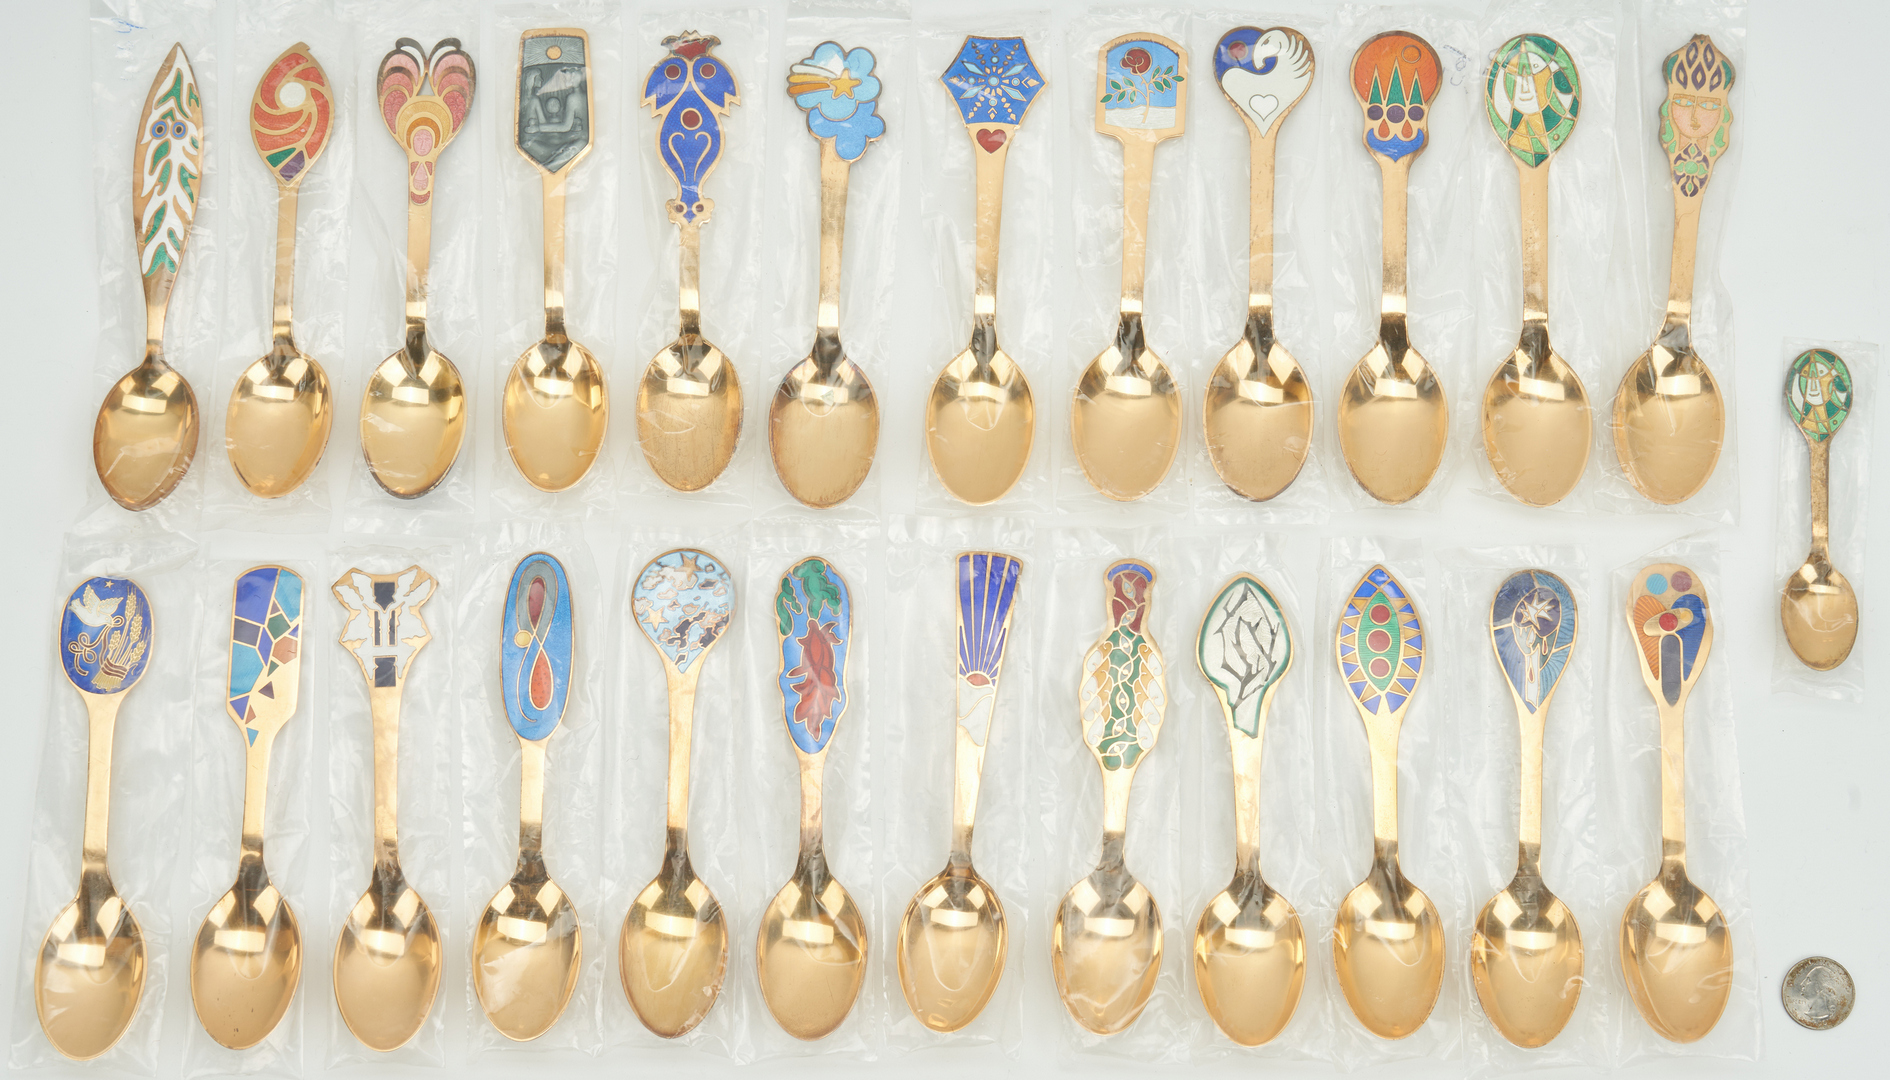 Lot 442: 25 A. Michelsen Gilded Sterling Silver Christmas Spoons, 1970-2000